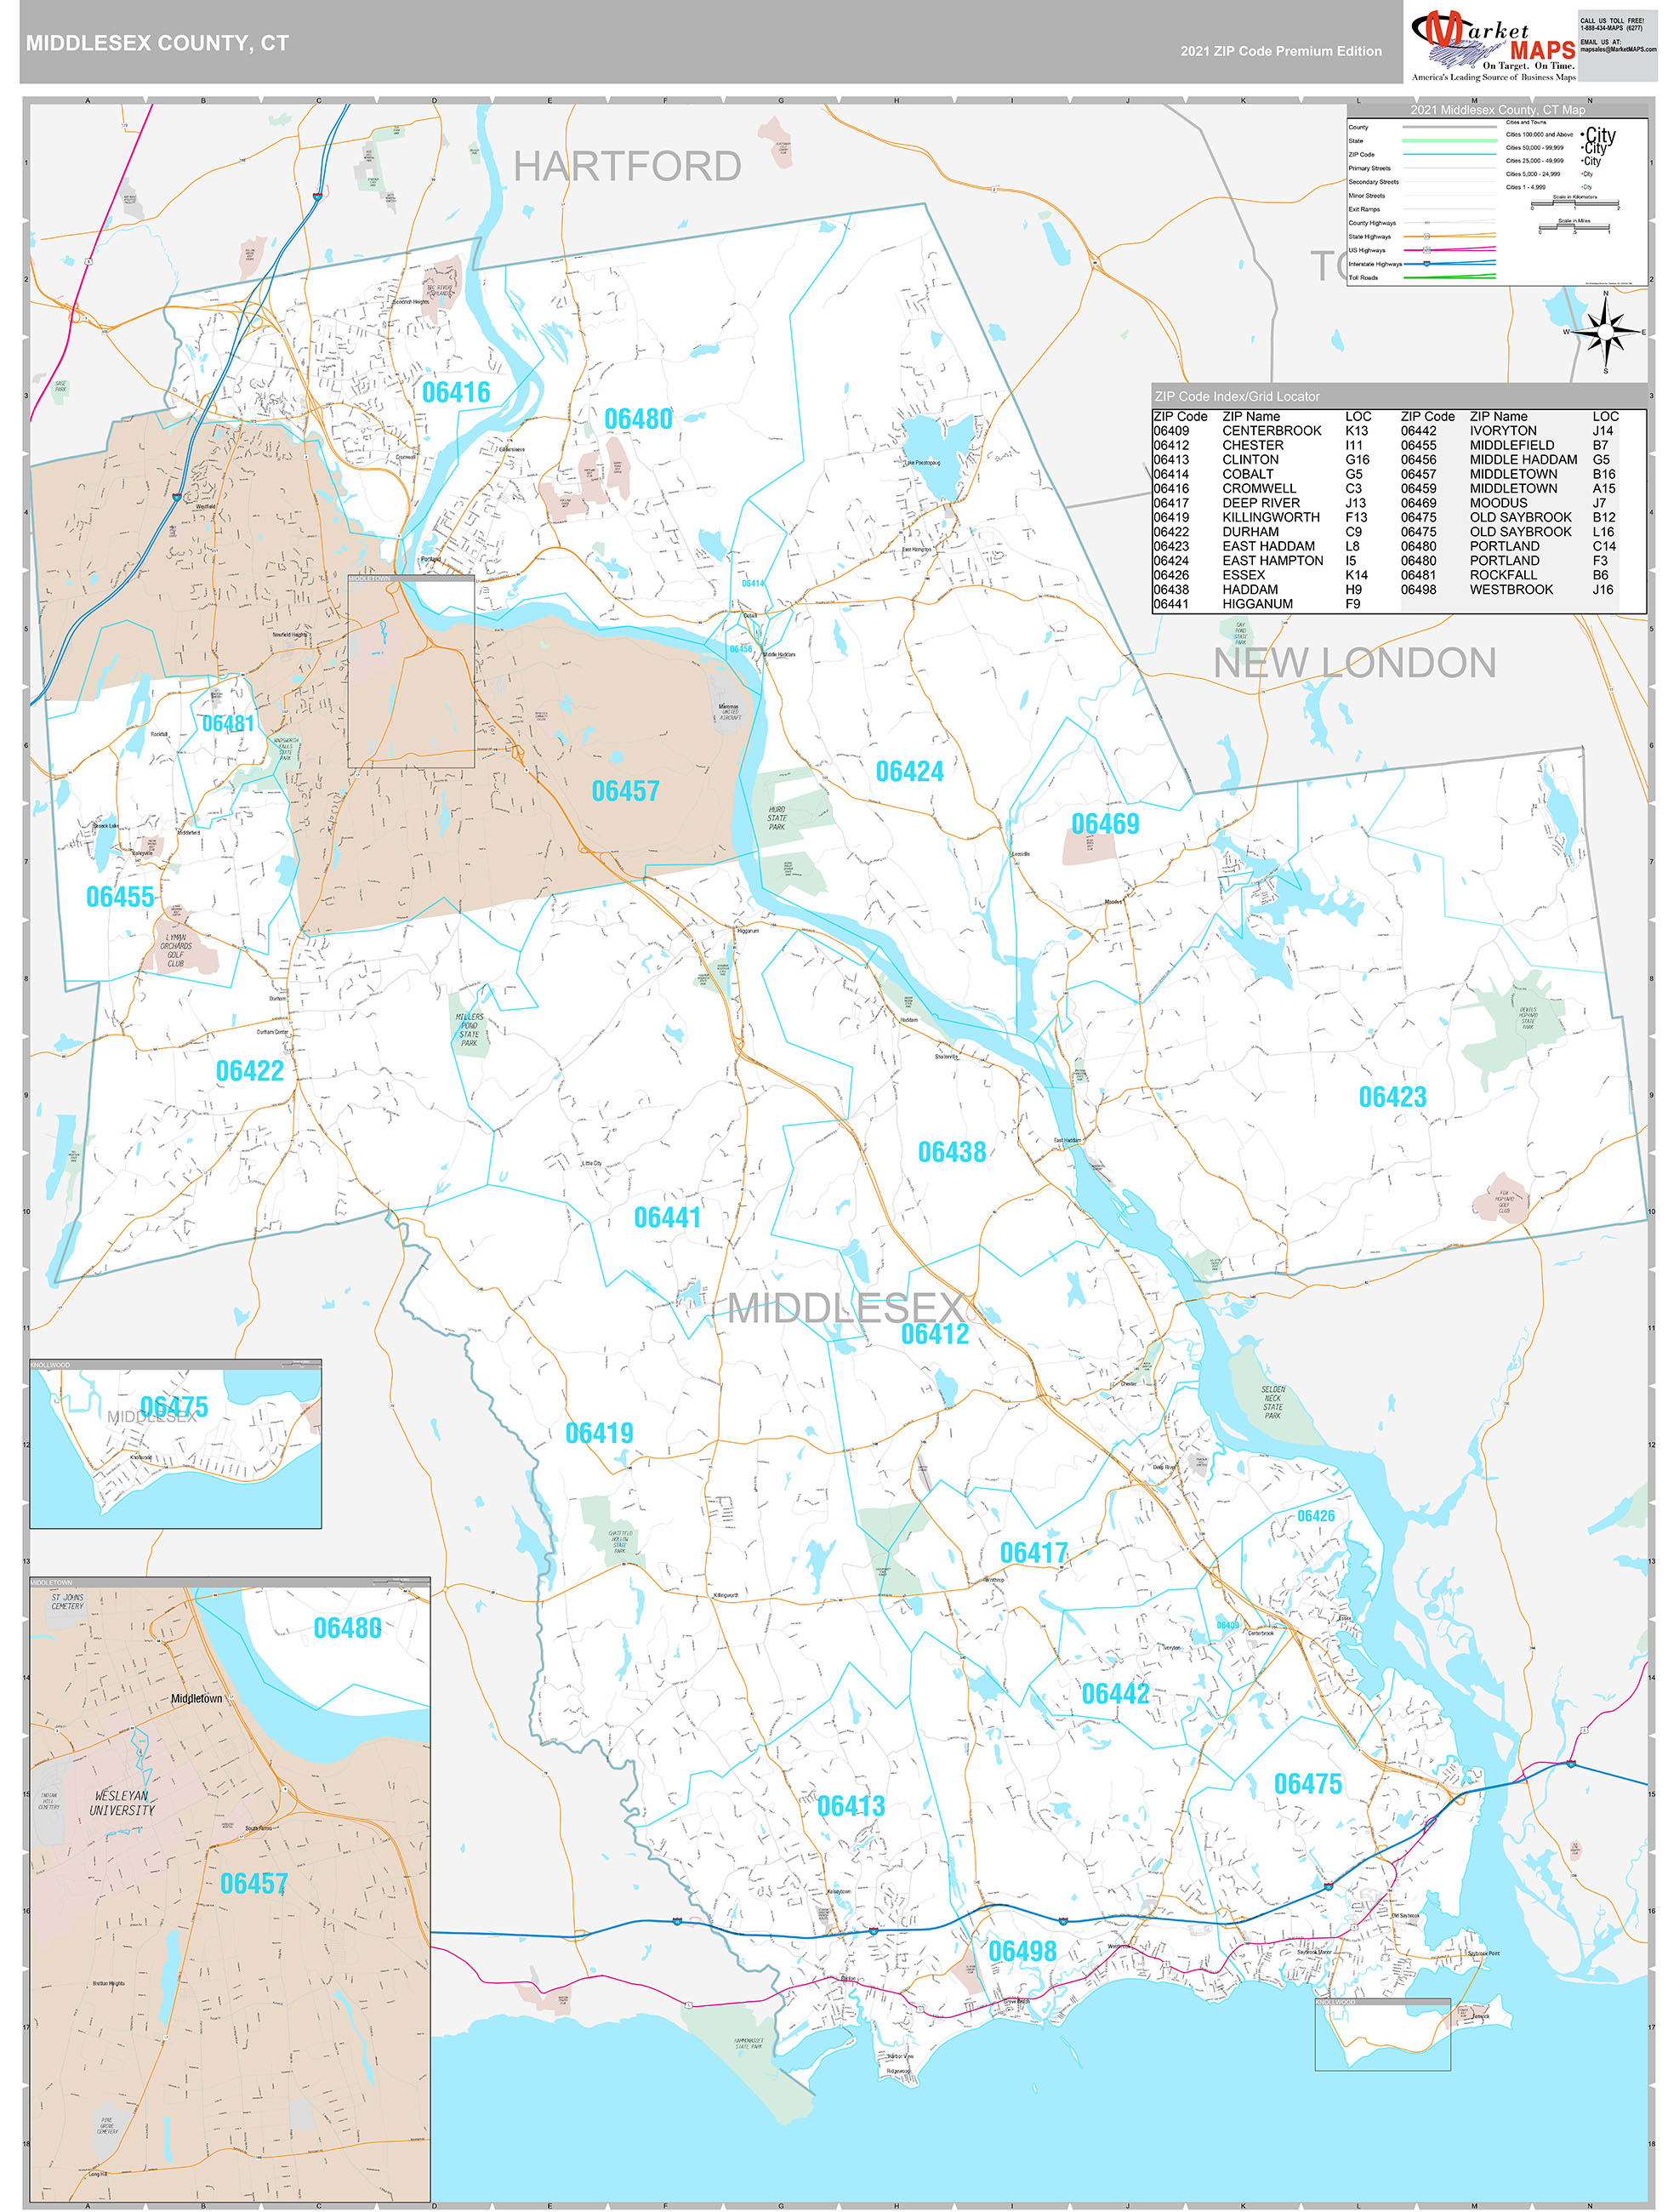 Middlesex County, CT Wall Map Premium Style by MarketMAPS